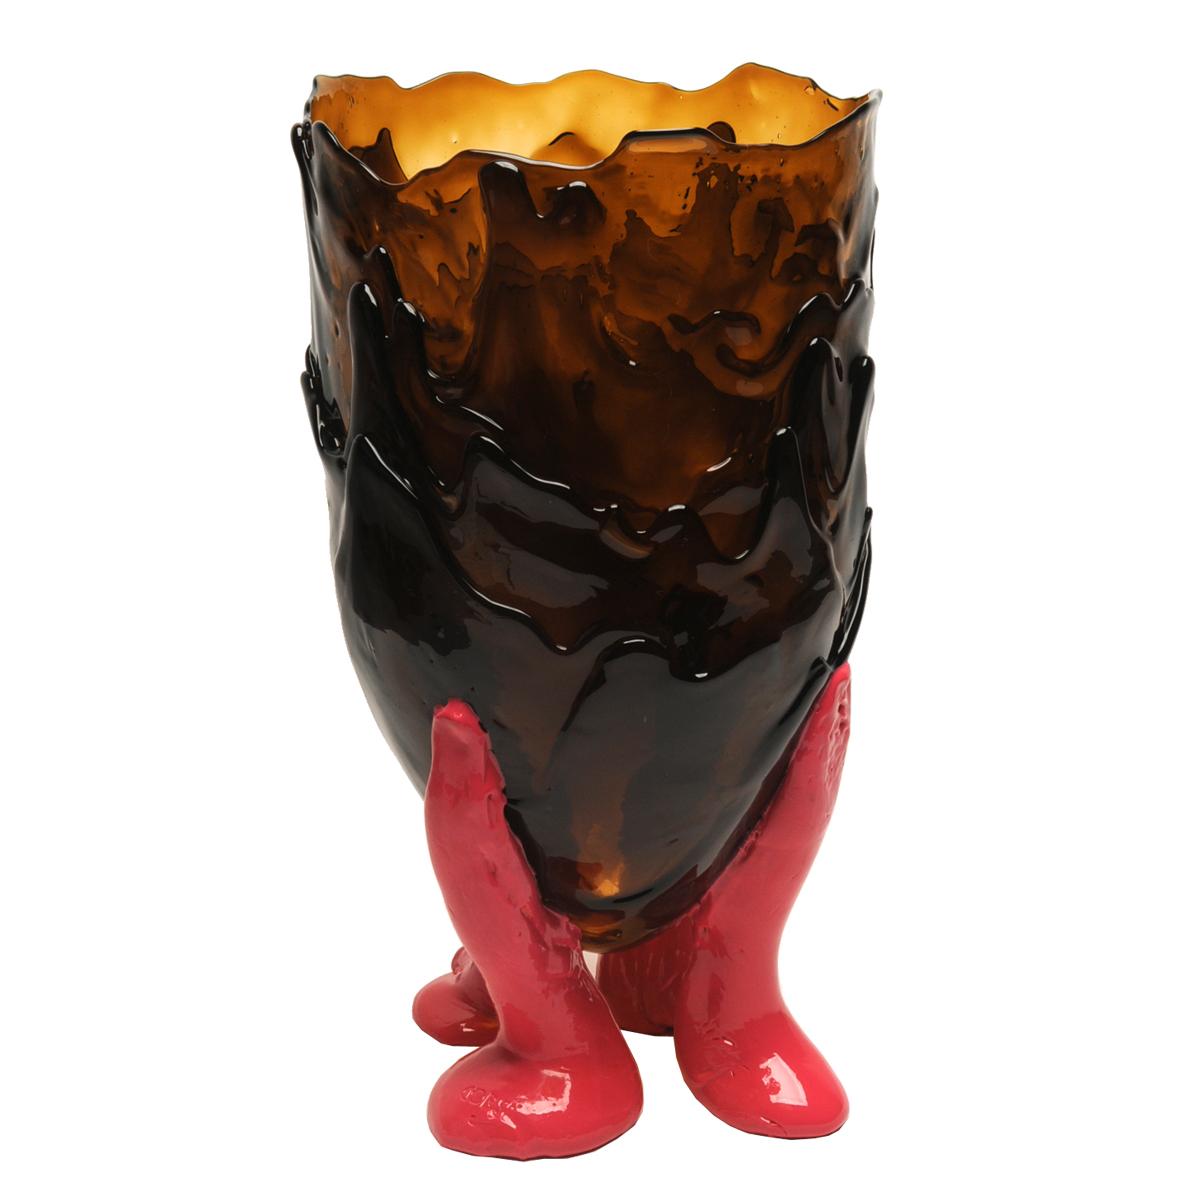 Clear extra colour vase - clear brown, matt fuchsia
Vase in soft resin designed by Gaetano Pesce in 1995 for Fish Design collection.

Measures: XL - ø 30cm x H 56cm
Colours: clear brown, matt fuchsia
Other sizes available.
Vase in soft resin